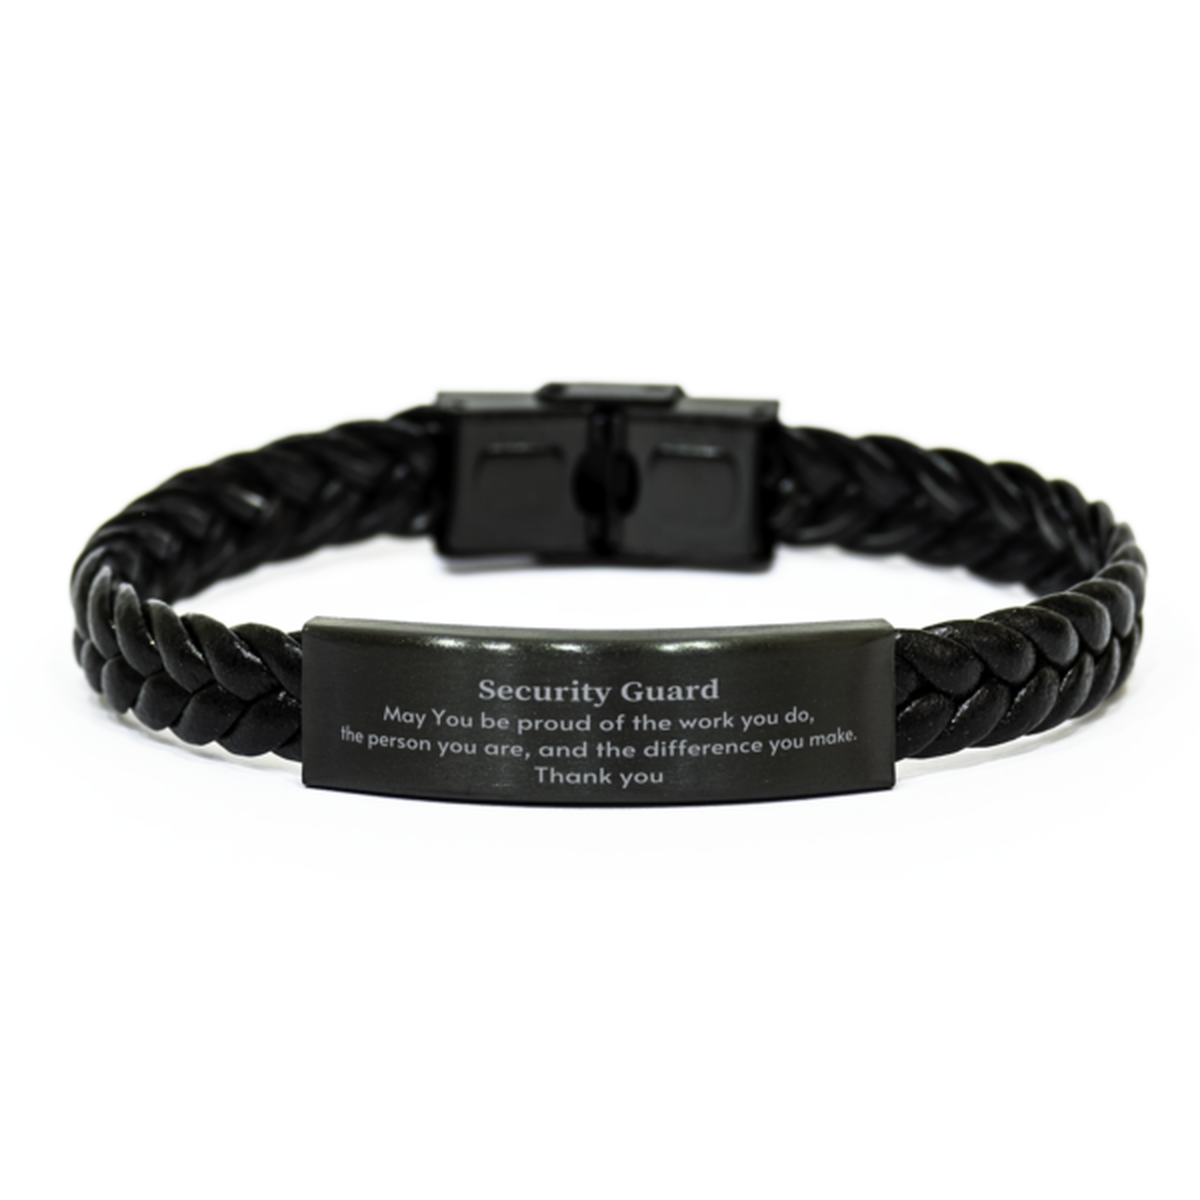 Heartwarming Braided Leather Bracelet Retirement Coworkers Gifts for Security Guard, Security Guard May You be proud of the work you do, the person you are Gifts for Boss Men Women Friends